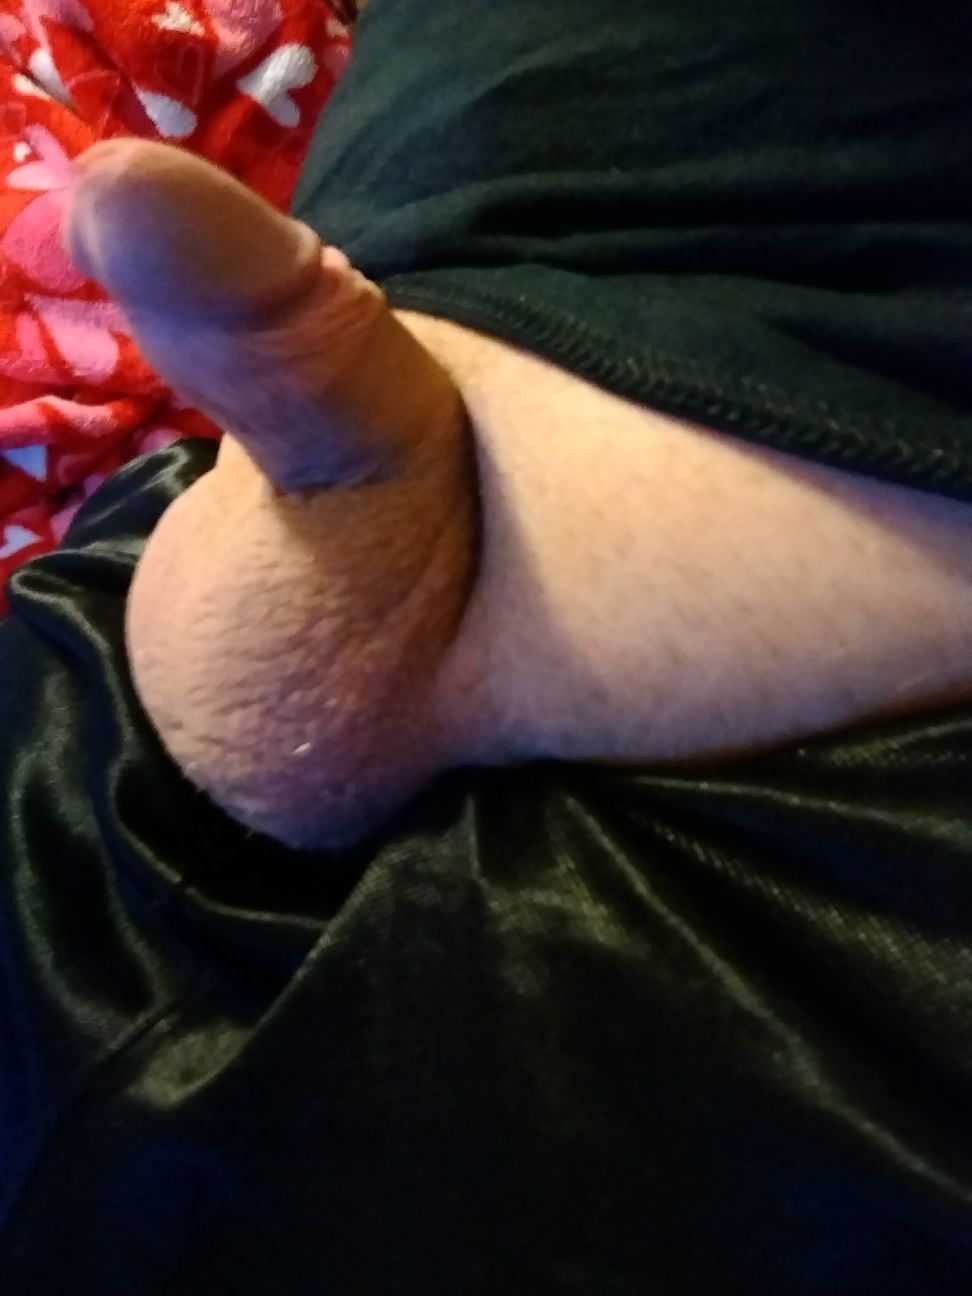 newer pics of my penis or balls #34